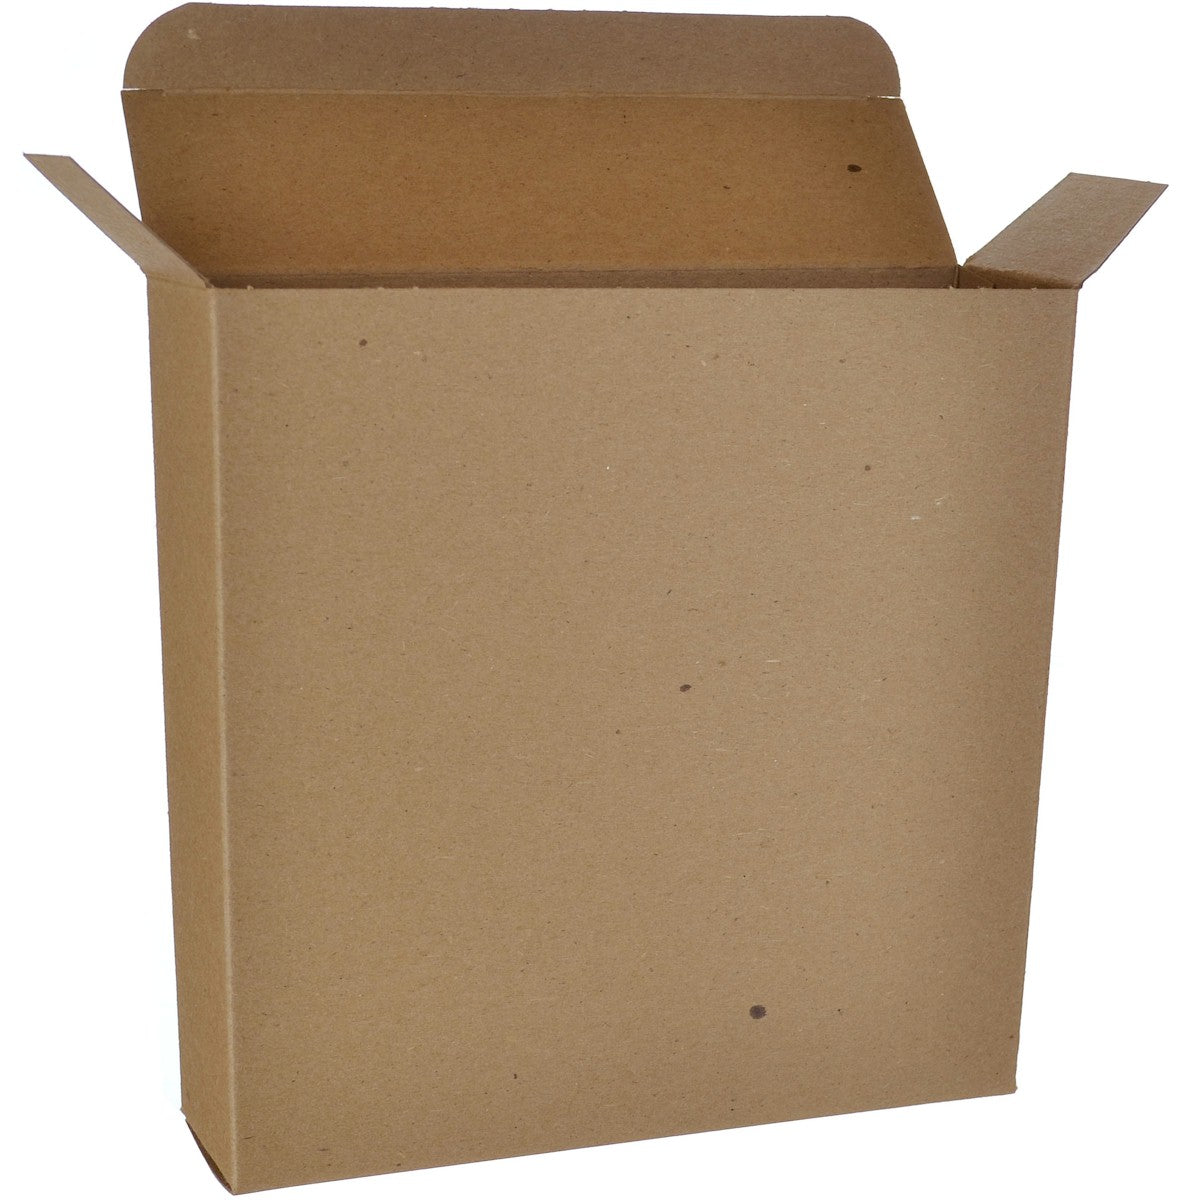 7 1/4 x 2 x 7 1/4 Brown Chipboard Boxes